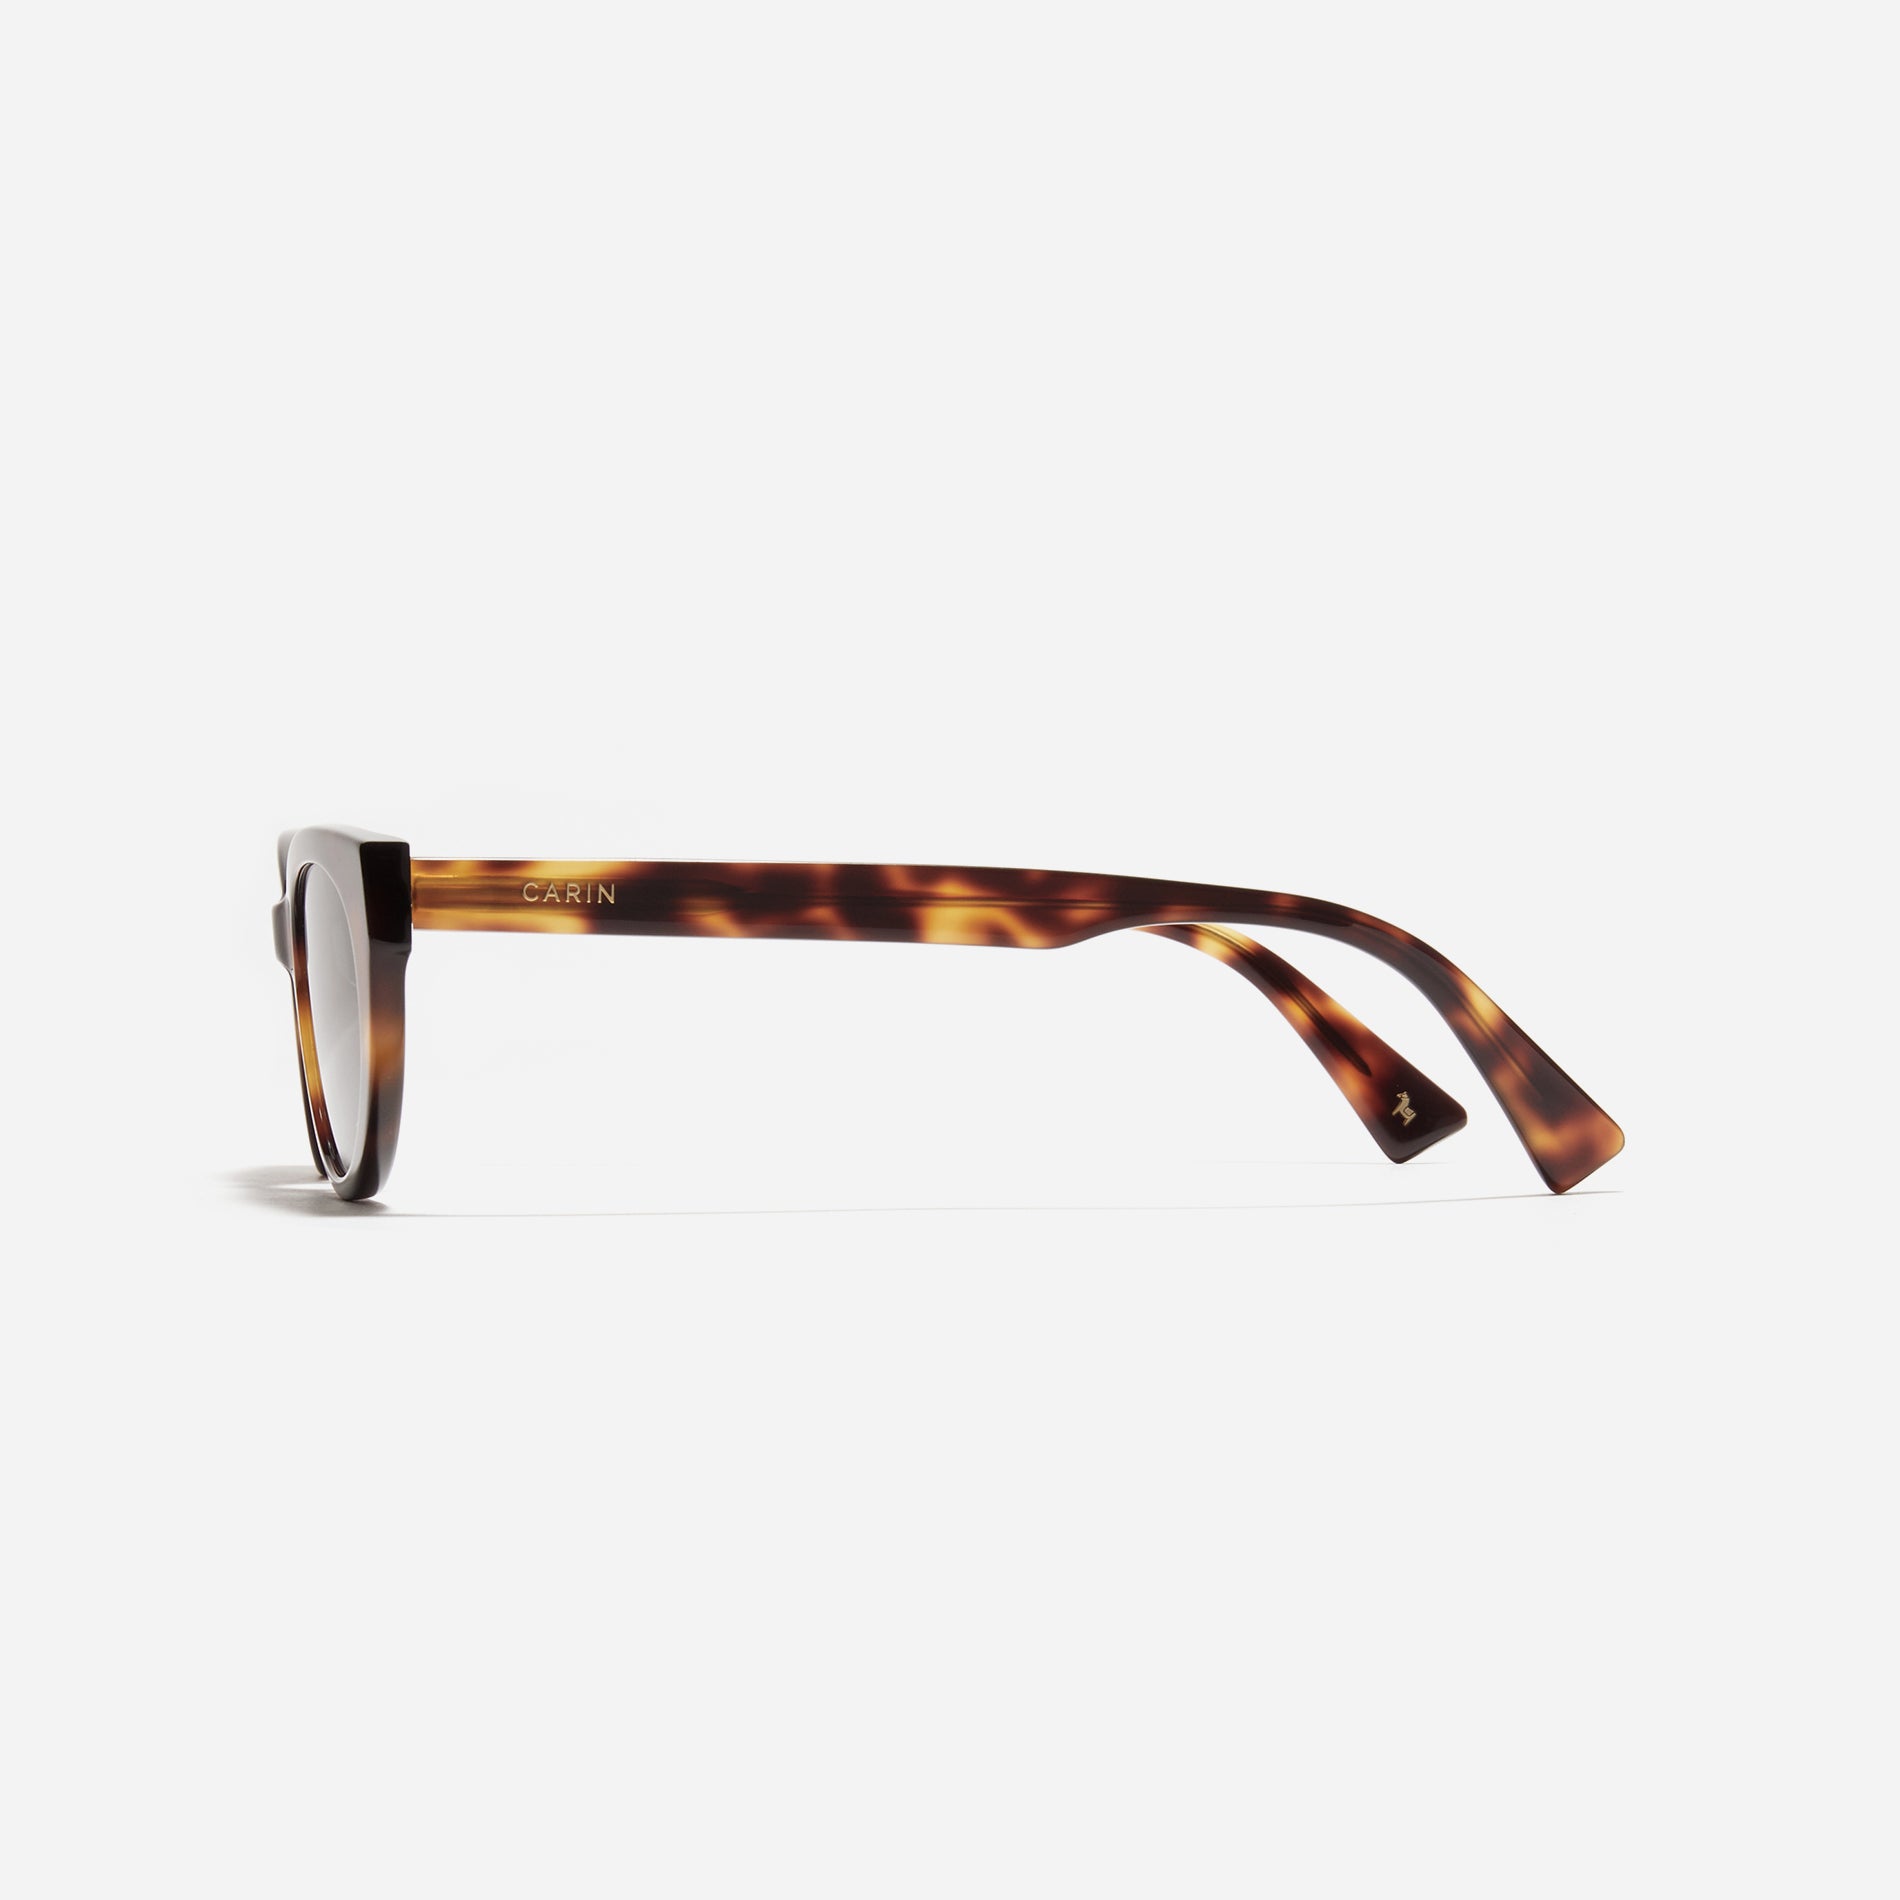 Embrace '90s-inspired design with a trendy narrow rim, cat-eye shape, and stylish color palette. Meet Kendall Black and Leopard frames, meticulously crafted from durable compressed acetate.